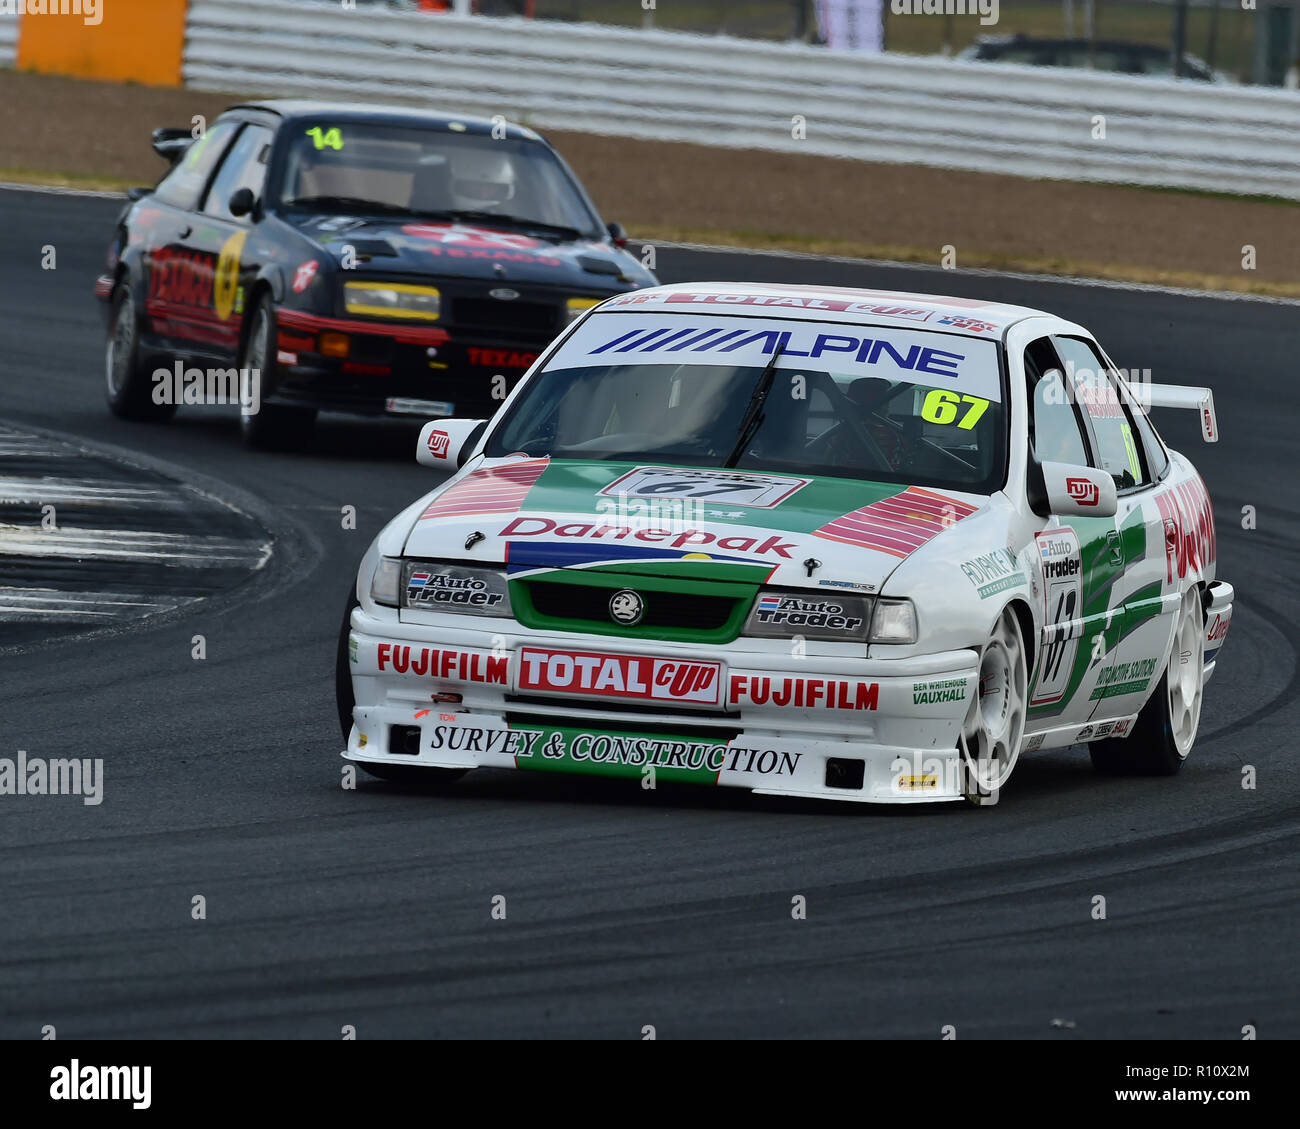 Tony Absolom, Vauxhall Cavalier, Super Touring Trophy, Silverstone Classic, July 2018, Silverstone, Northamptonshire, England, circuit racing, cjm-pho Stock Photo